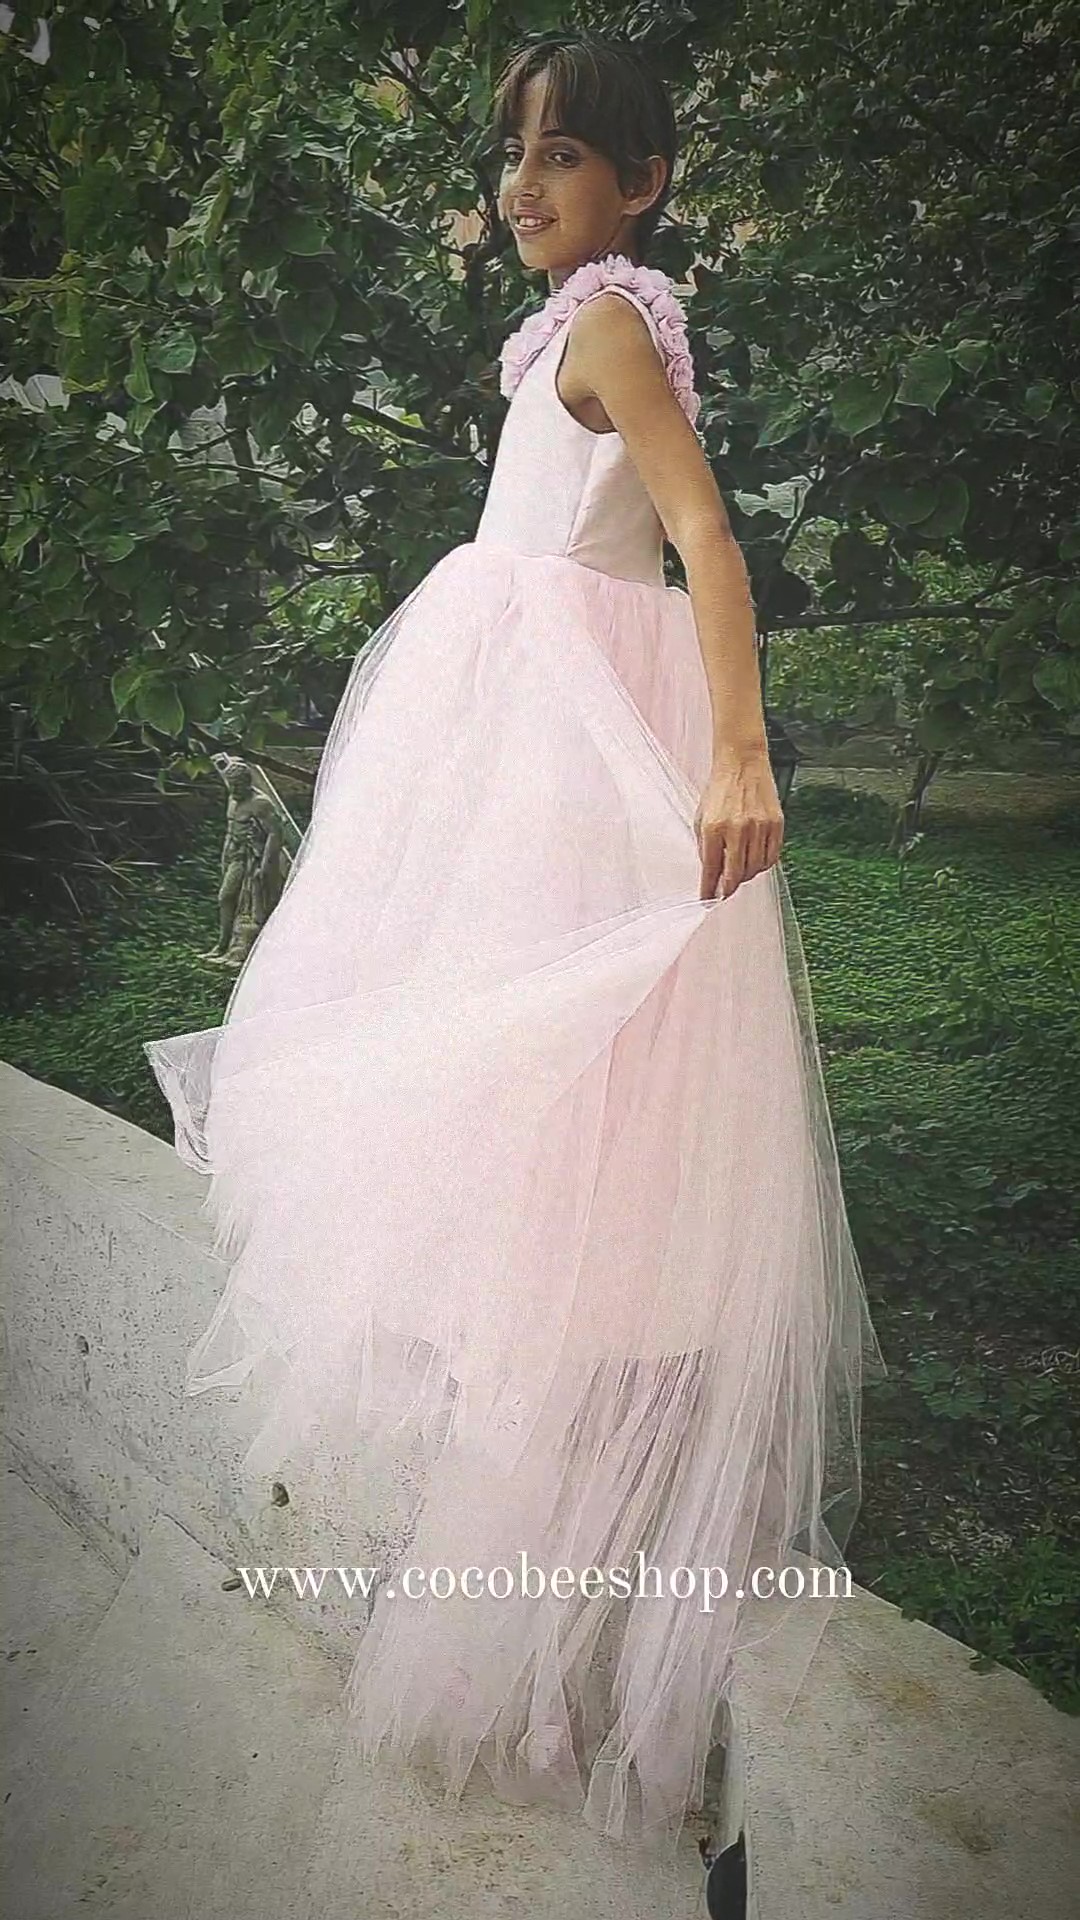 cocobee-zulka-backless-pink-pearls-gown-train-2_Moment1